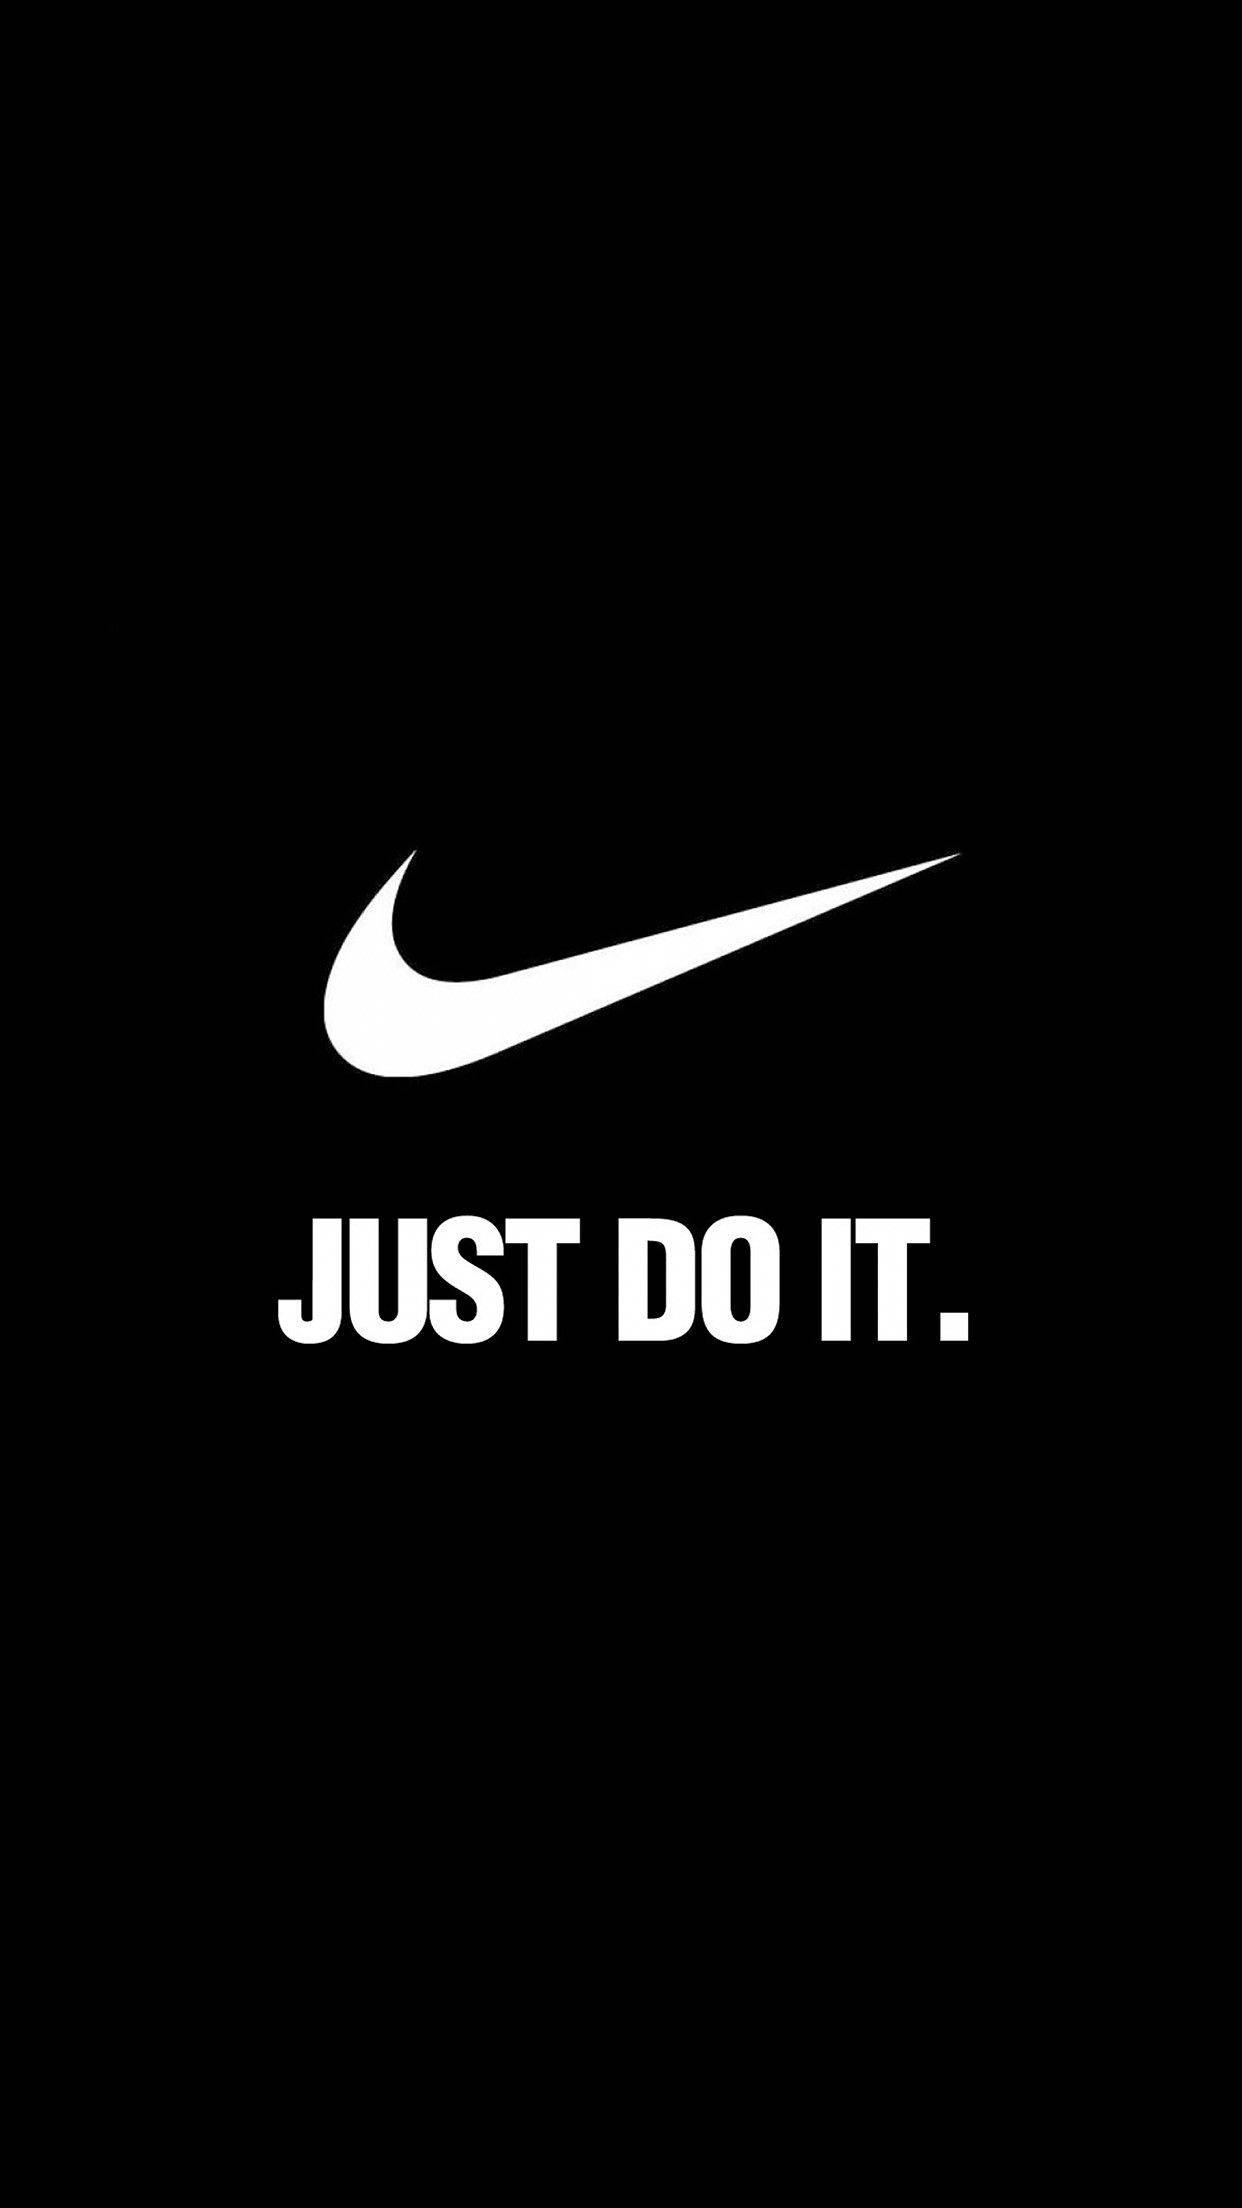 Nike Brand Just Do It Background